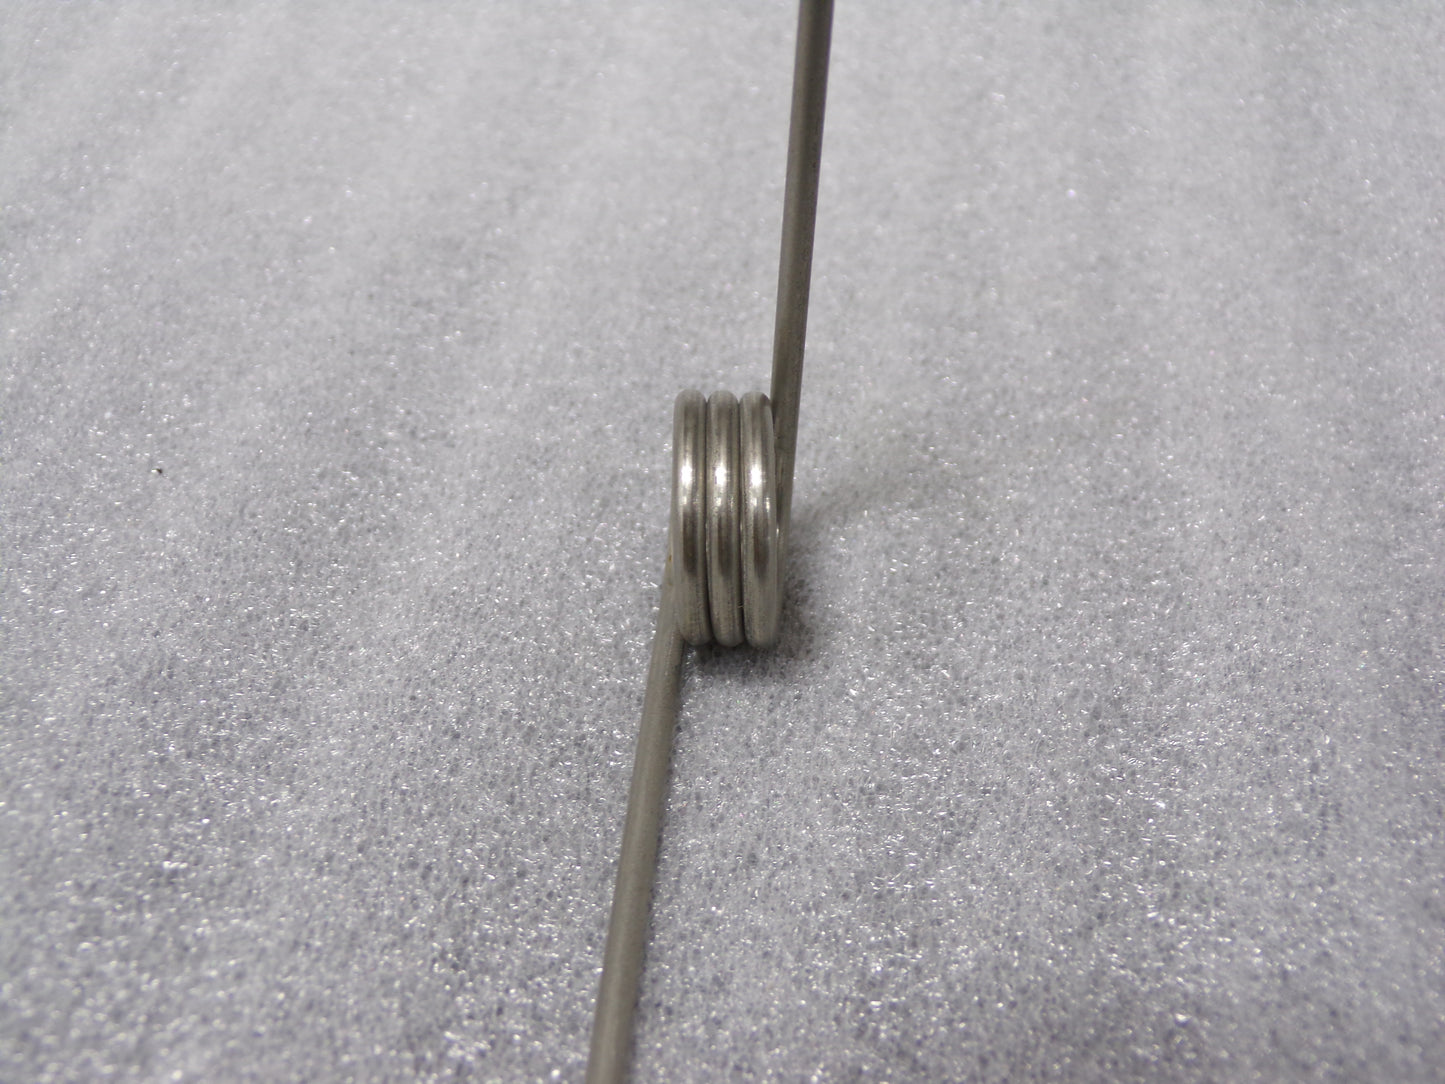 90 Degree 302 Stainless Steel Torsion Spring with 0.776 in Outside Dia. (CR00190-BT26)